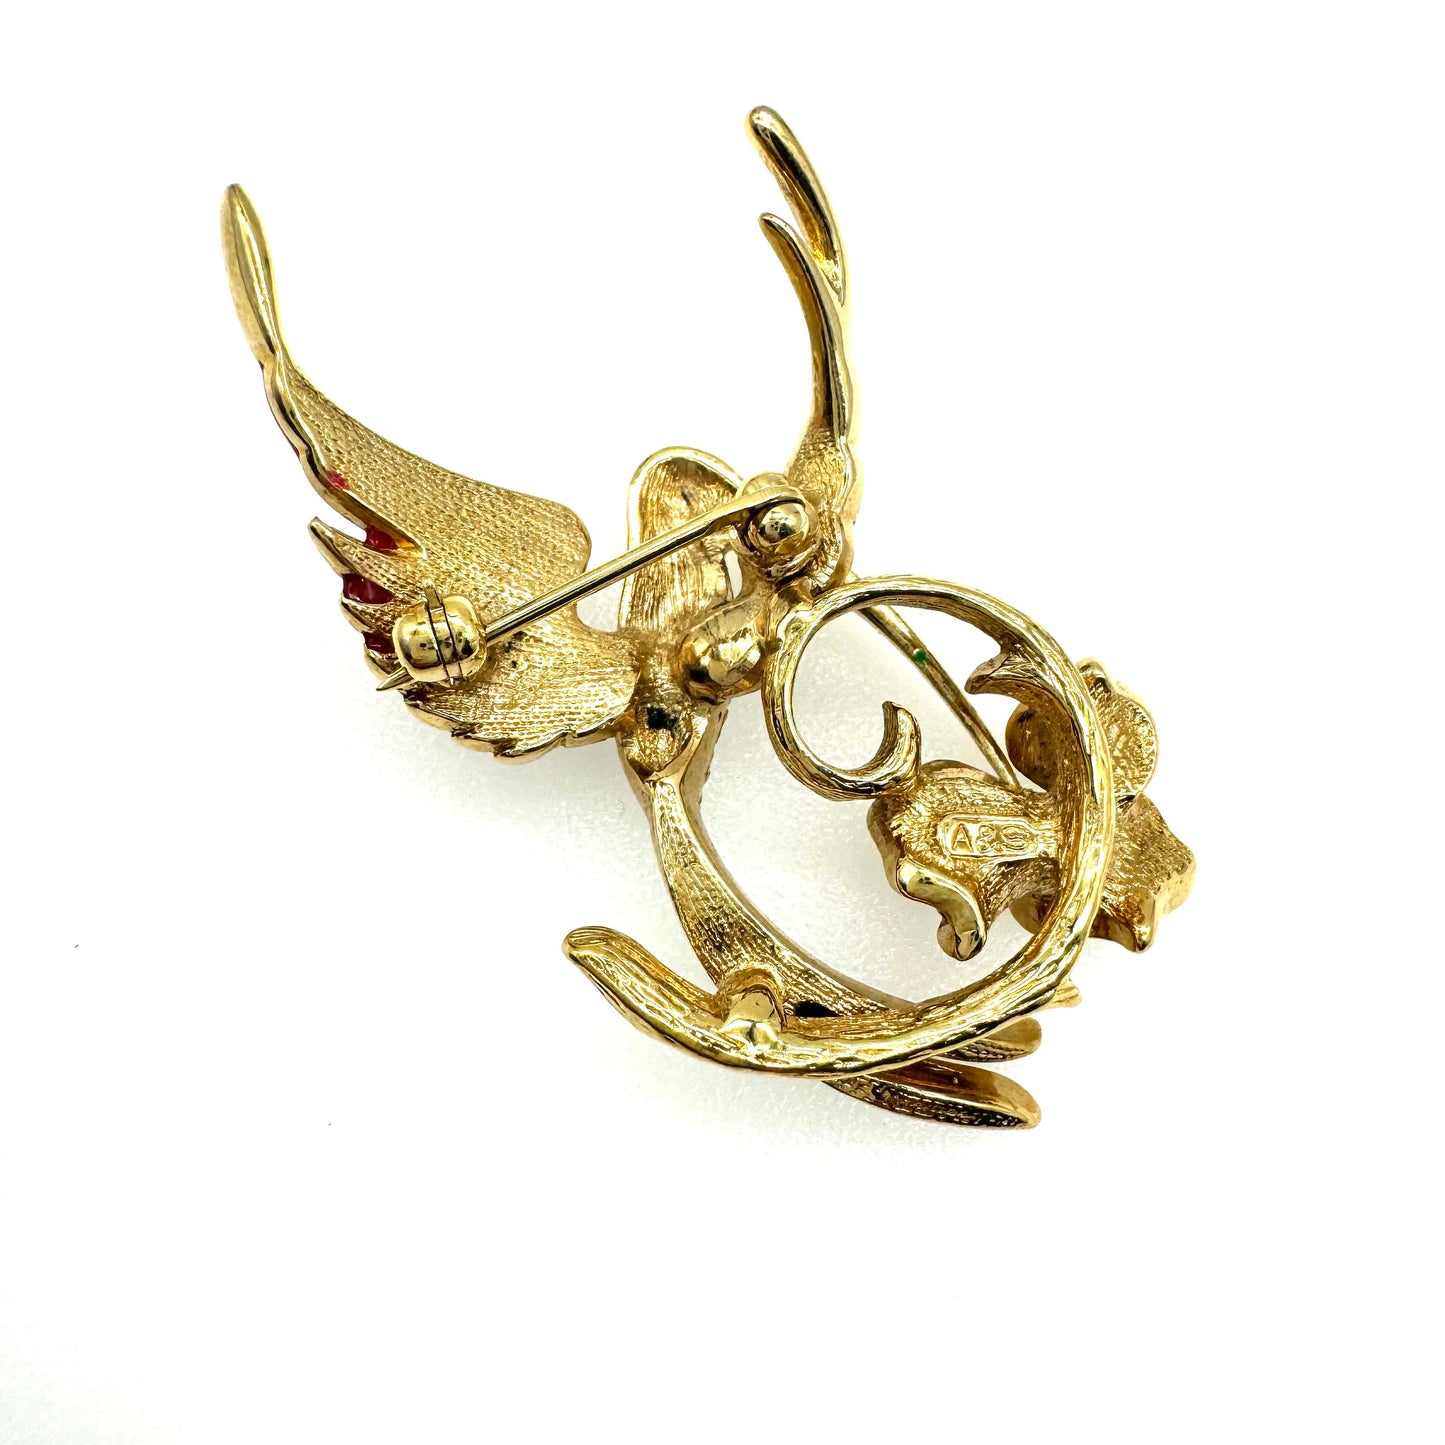 Attwood and Sawyer 22ct gold plated Red and Black Enamel and Swarovski Crystal Hummingbird and Flower Brooch